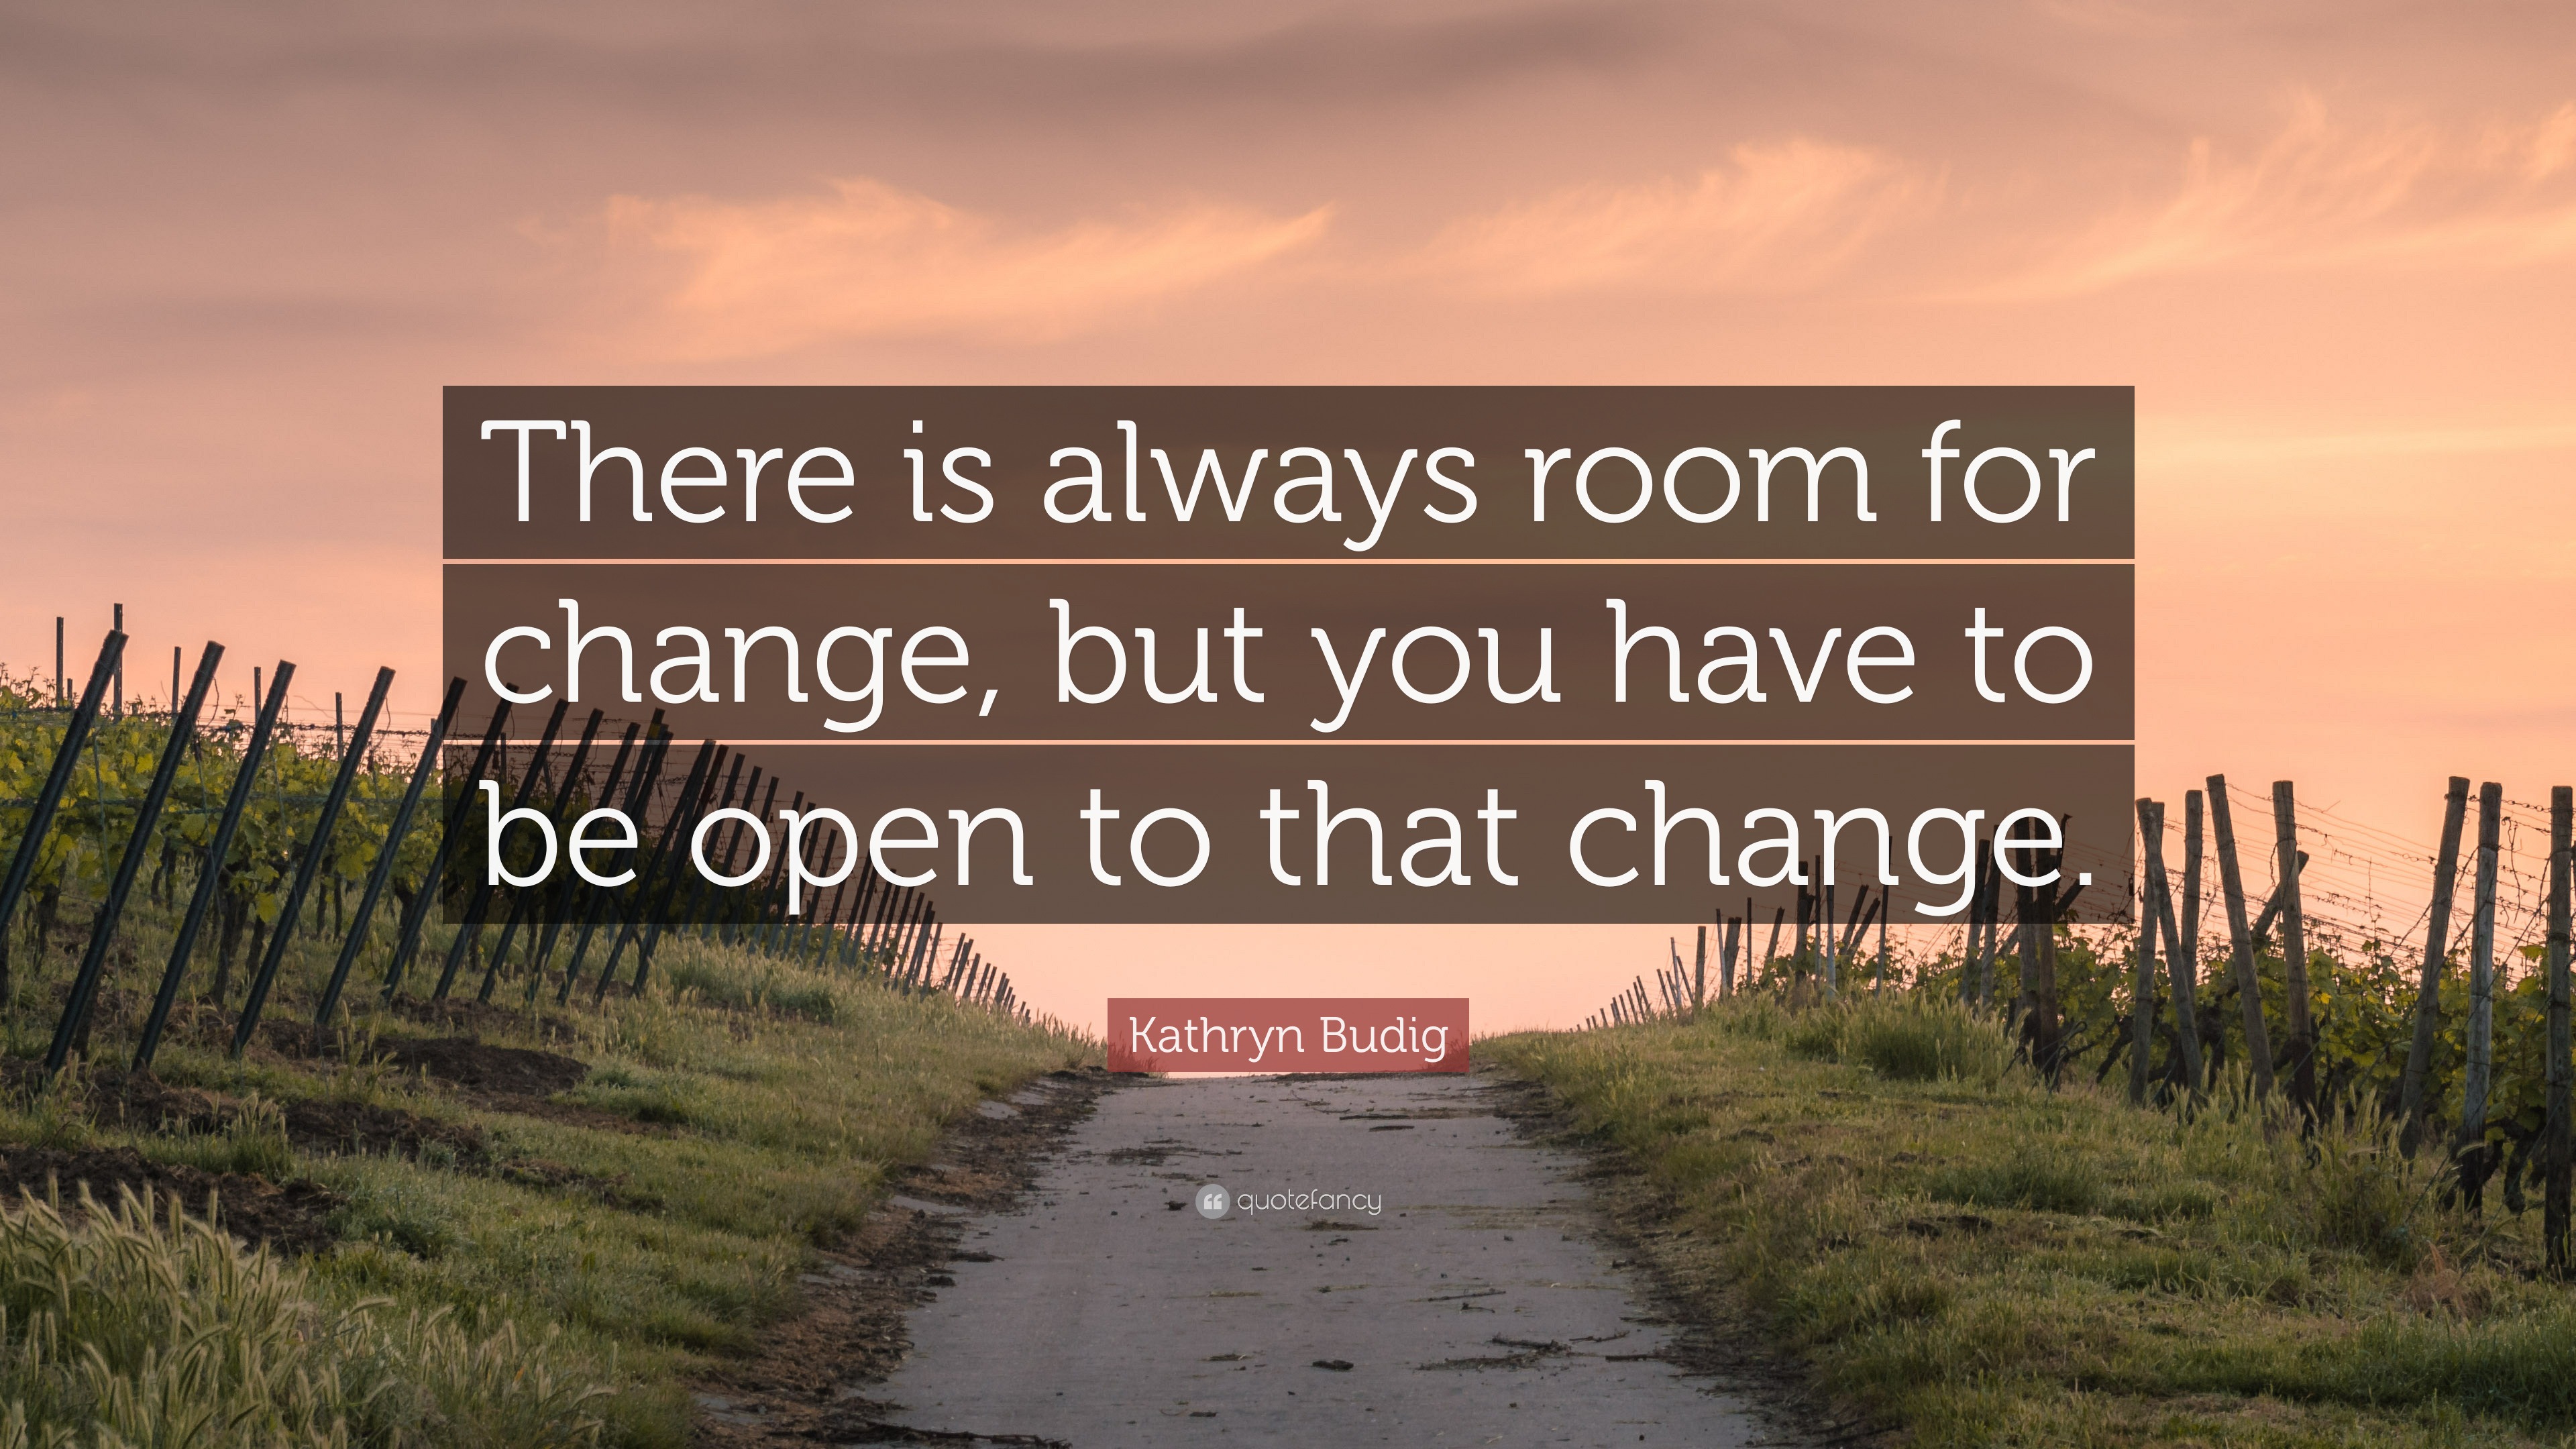 Kathryn Budig Quote: “There is always room for change, but you have to ...